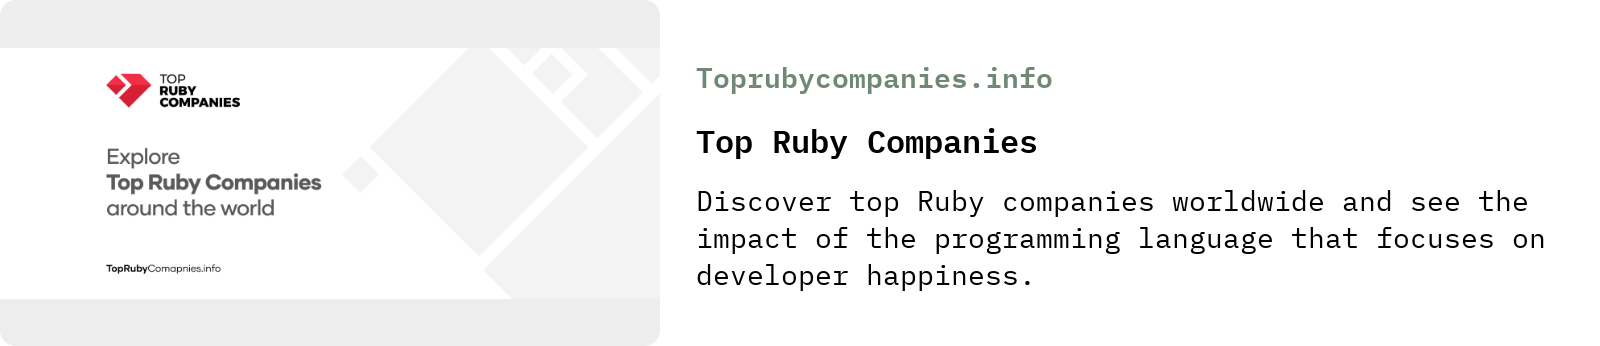 From Toprubycompanies.info: Top Ruby Companies | Discover top Ruby companies worldwide and see the impact of the programming language that focuses on developer happiness.